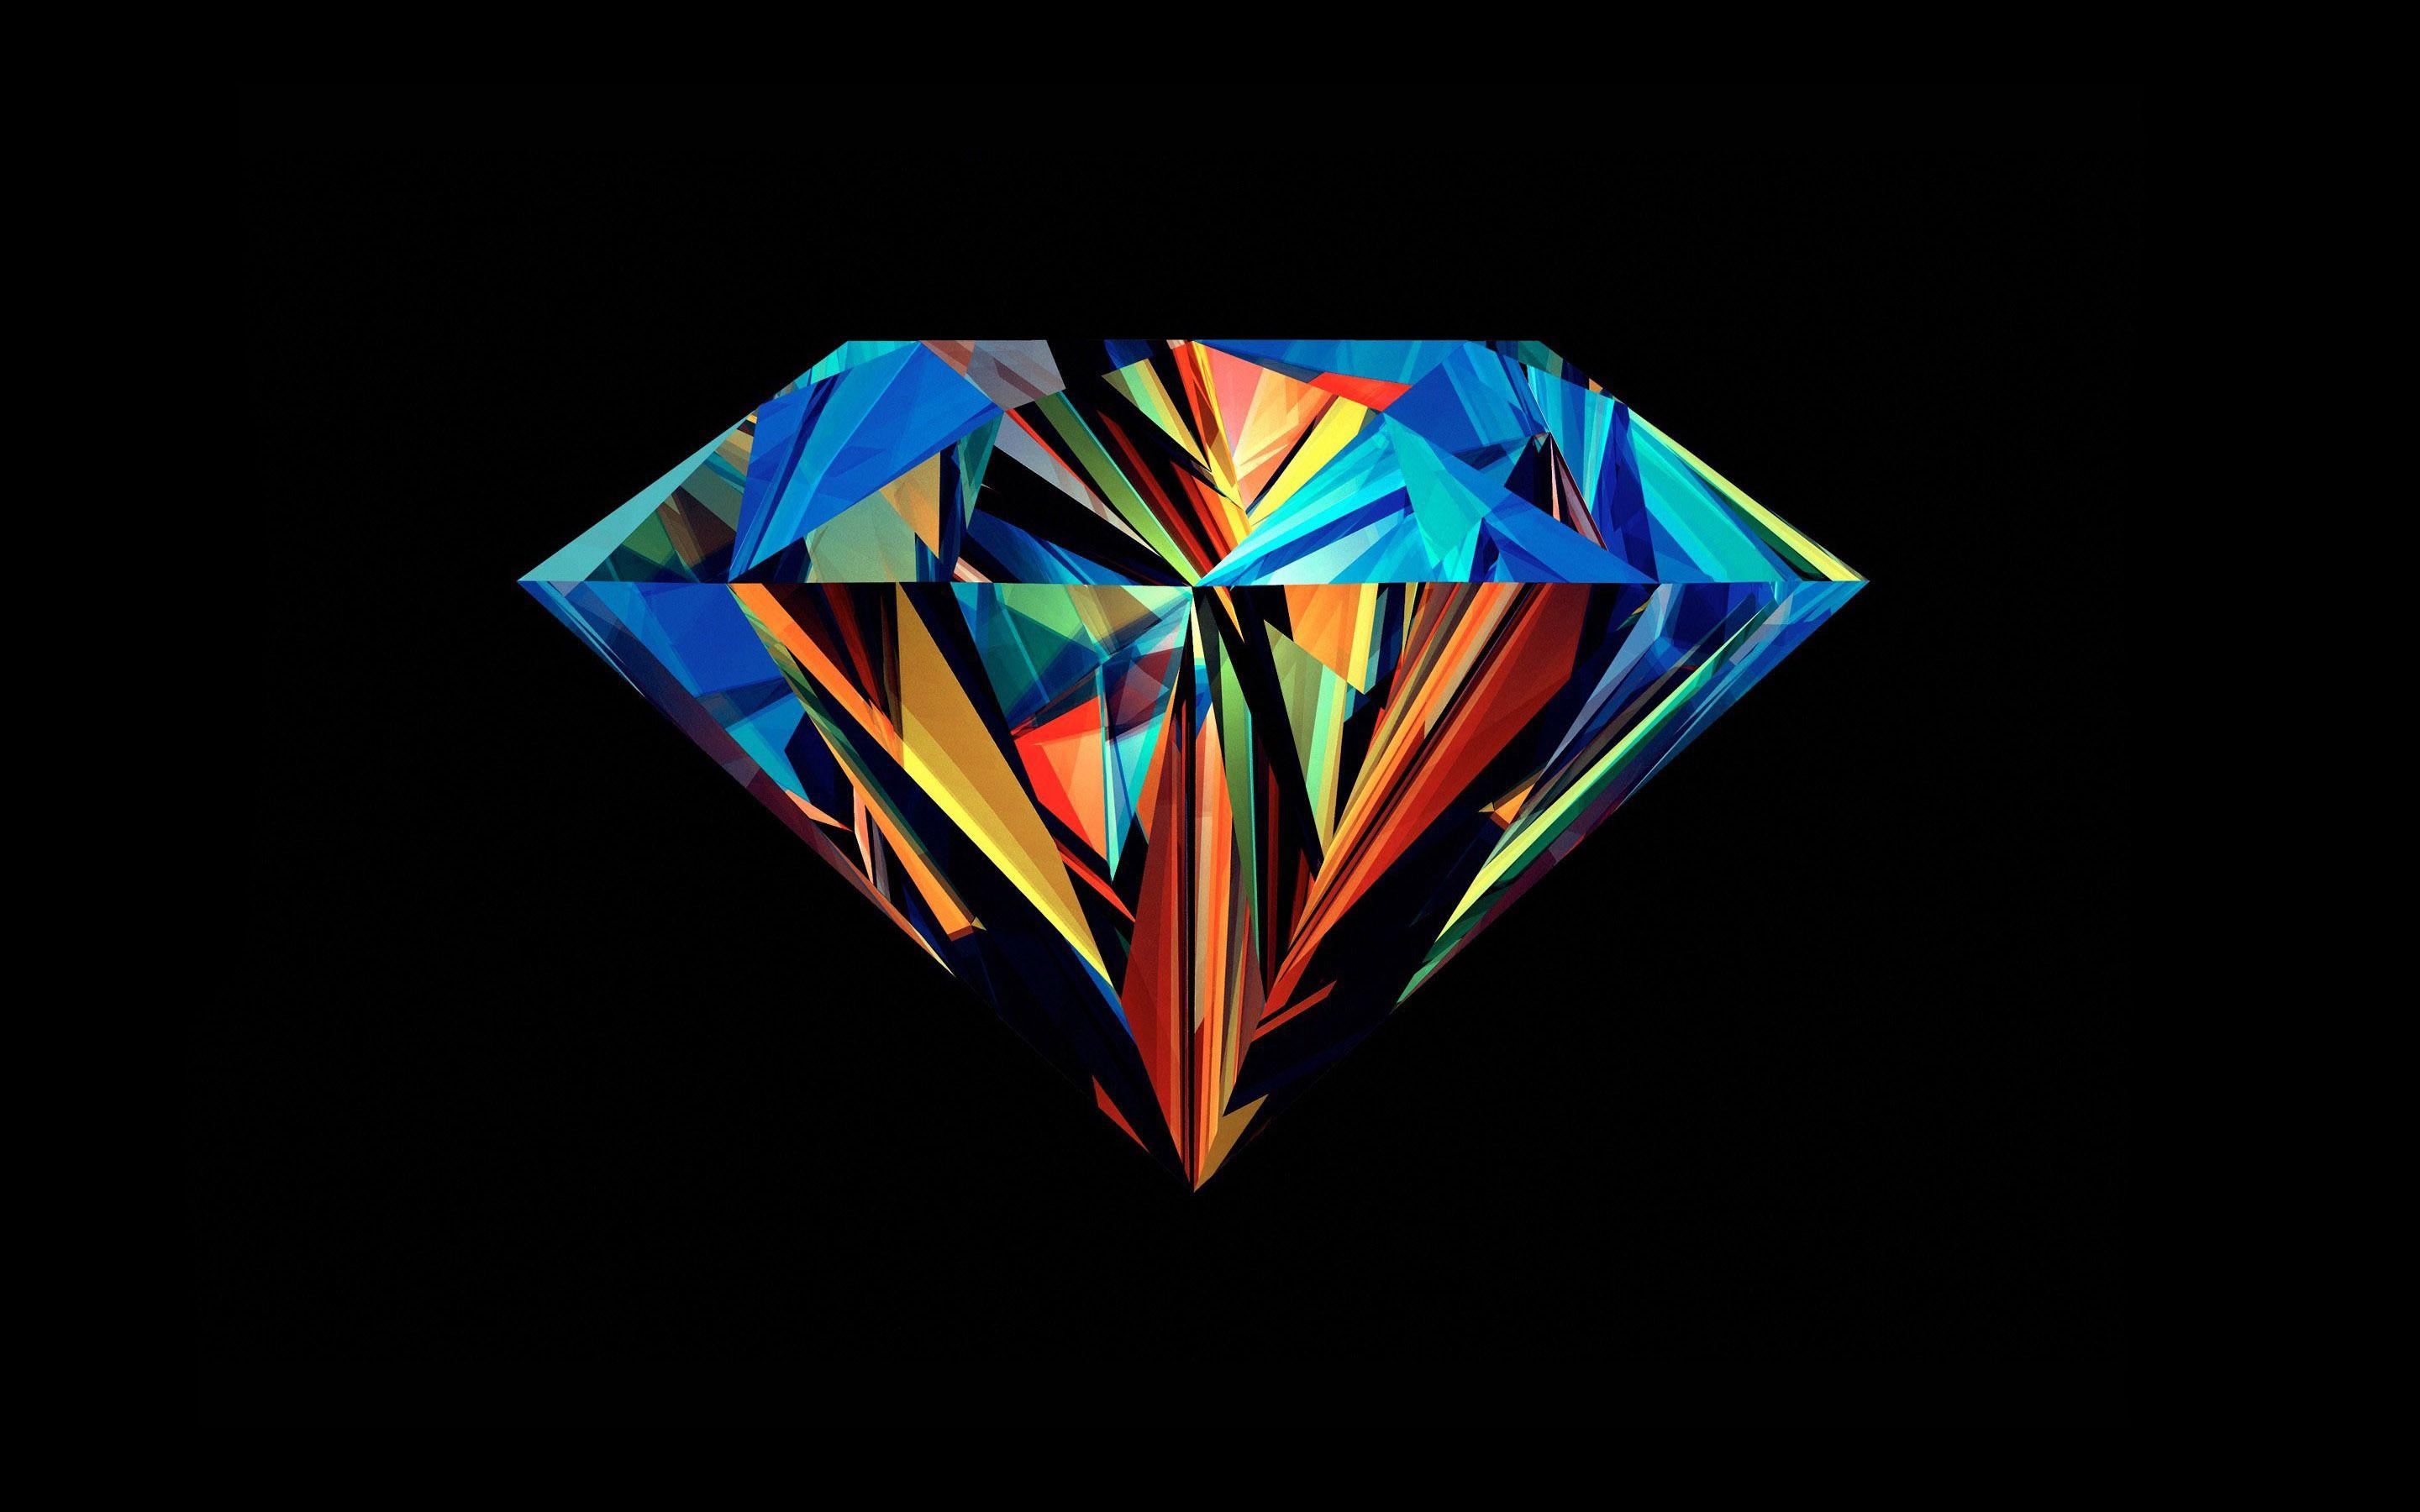 Cool Diamond Logo - Enhancing Knowledge about Diamonds - Tips for Getting Started